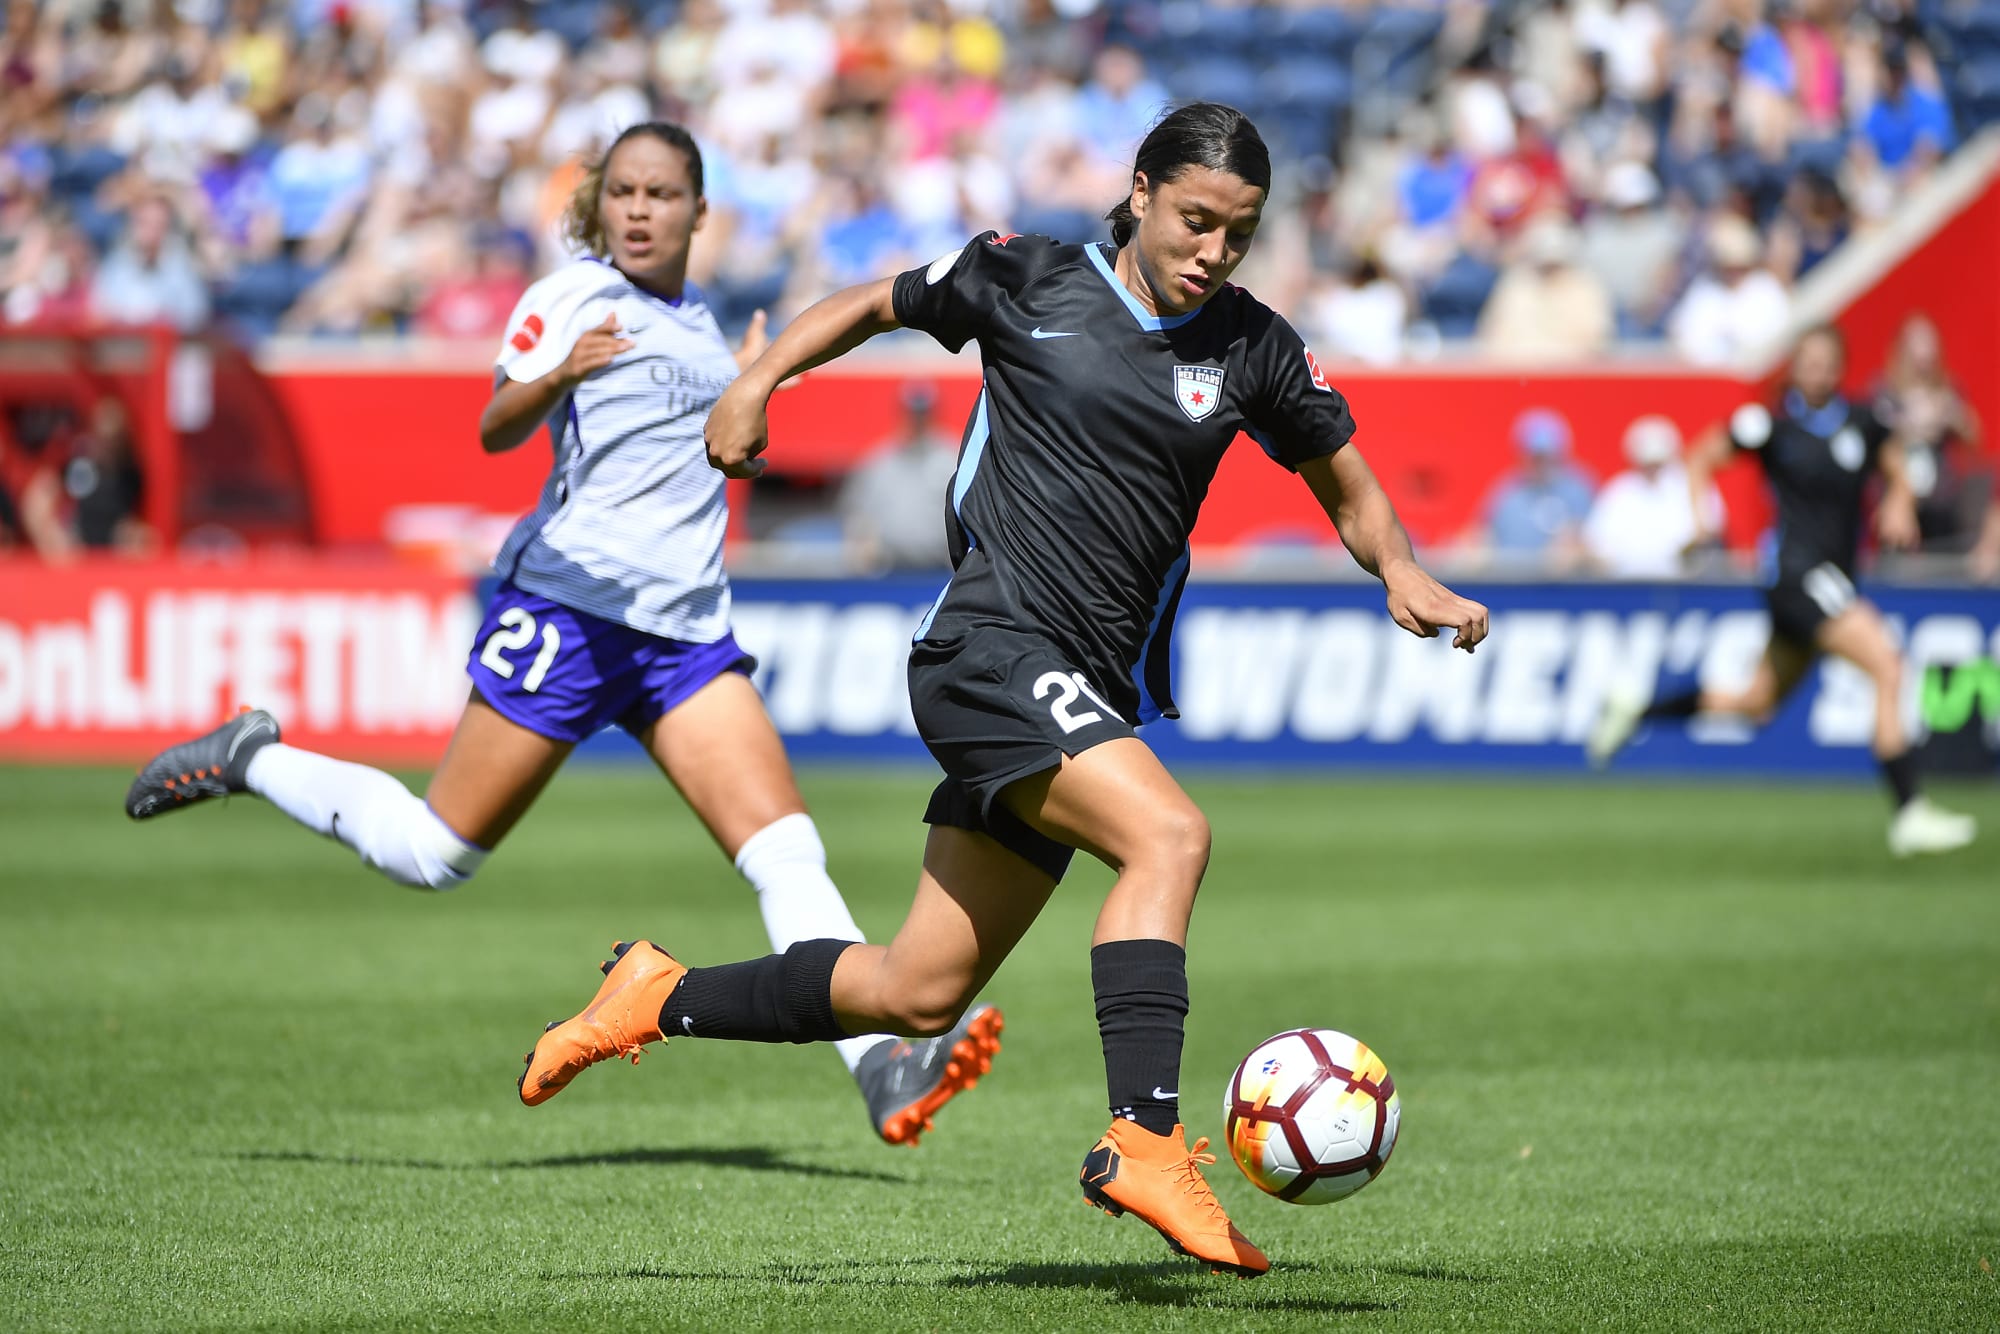 Chicago Red Stars A newbie's guide and 2019 season preview